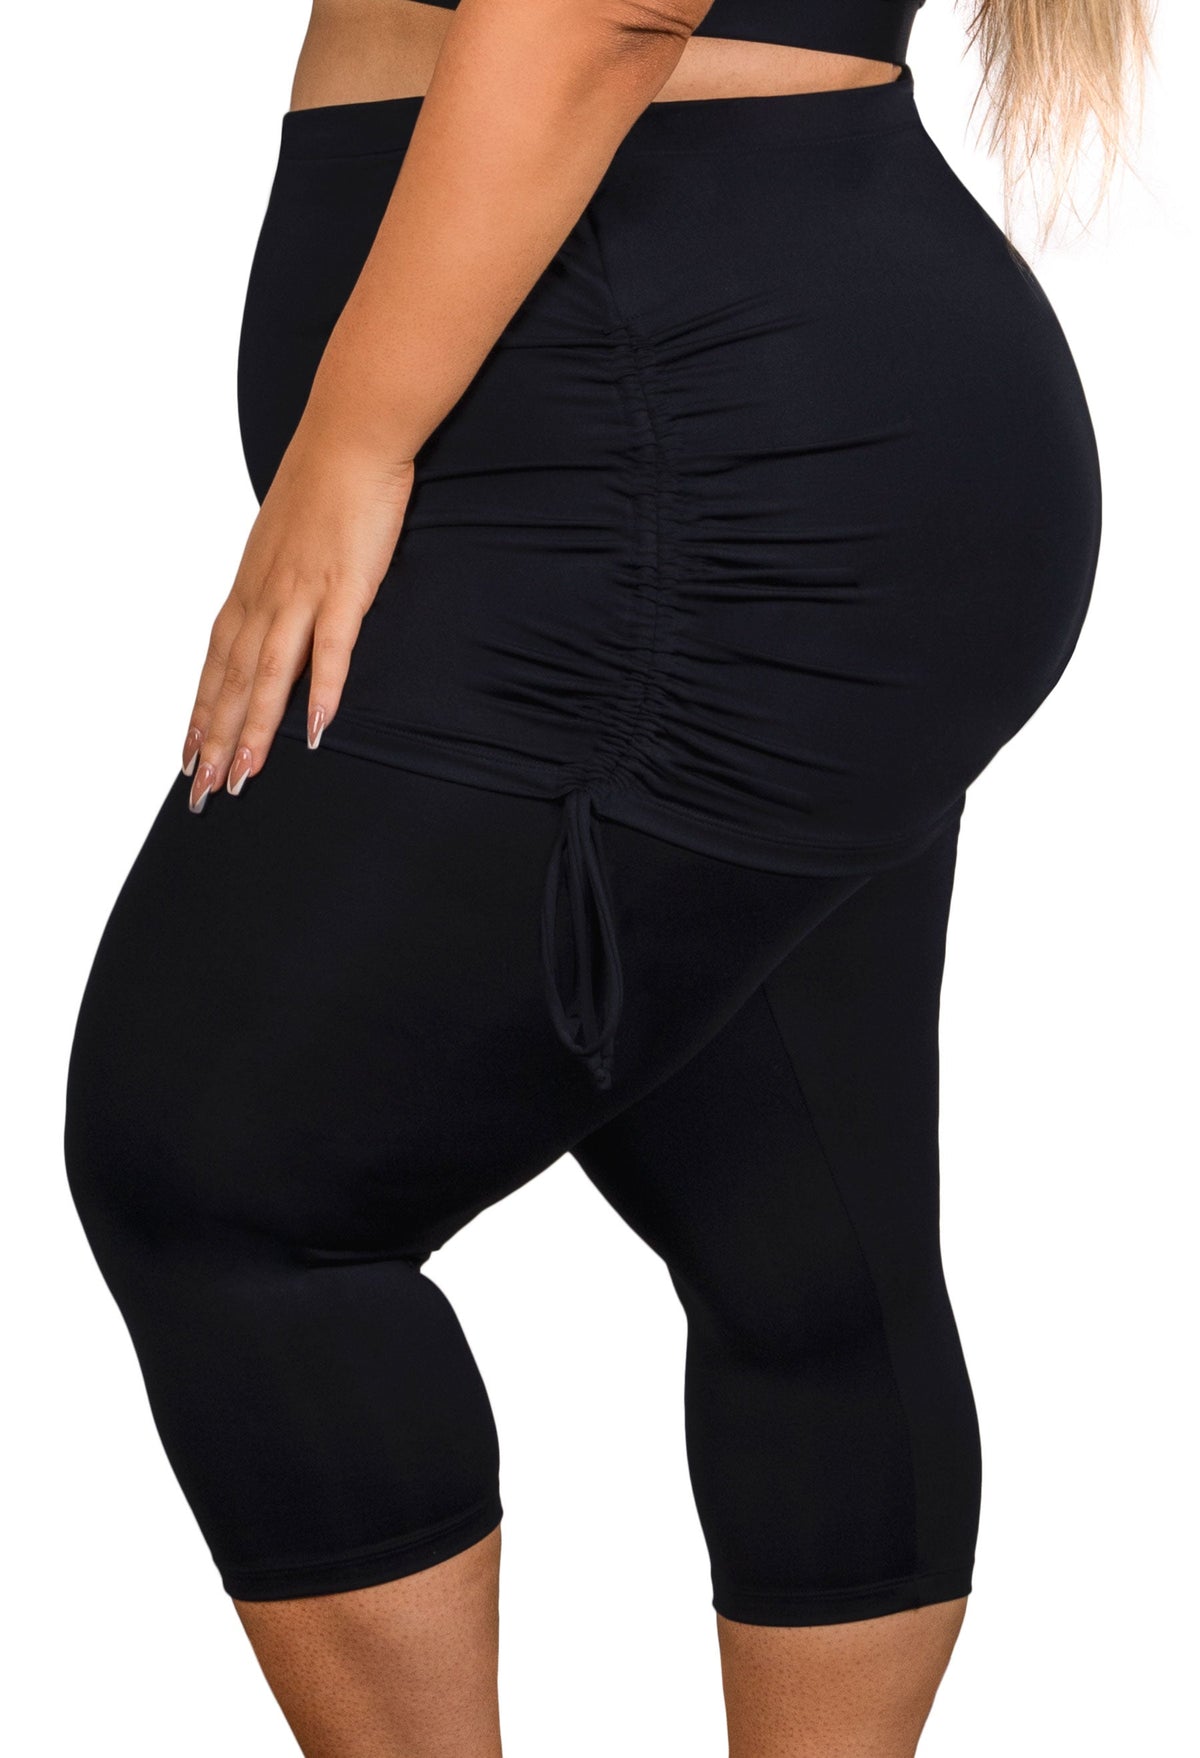 Plus Size Anti Chafing Swim Tights with Skirt